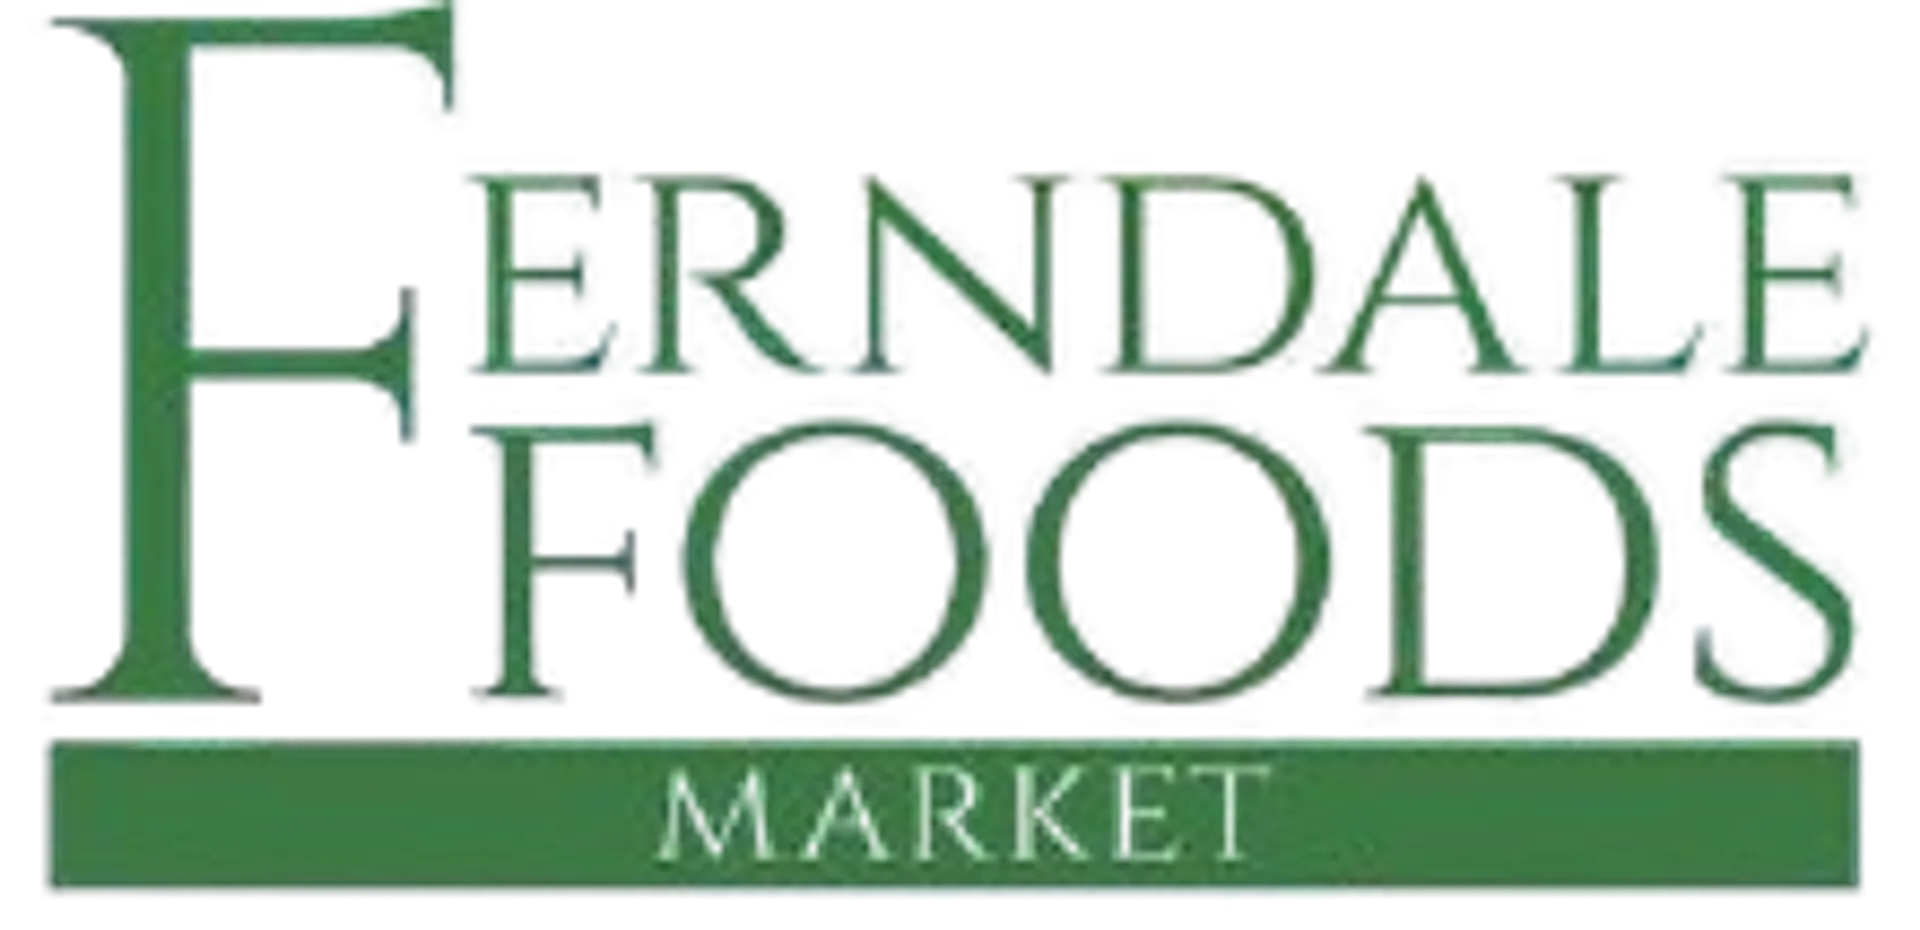 FERNDALE FOODS logo. Current weekly ad